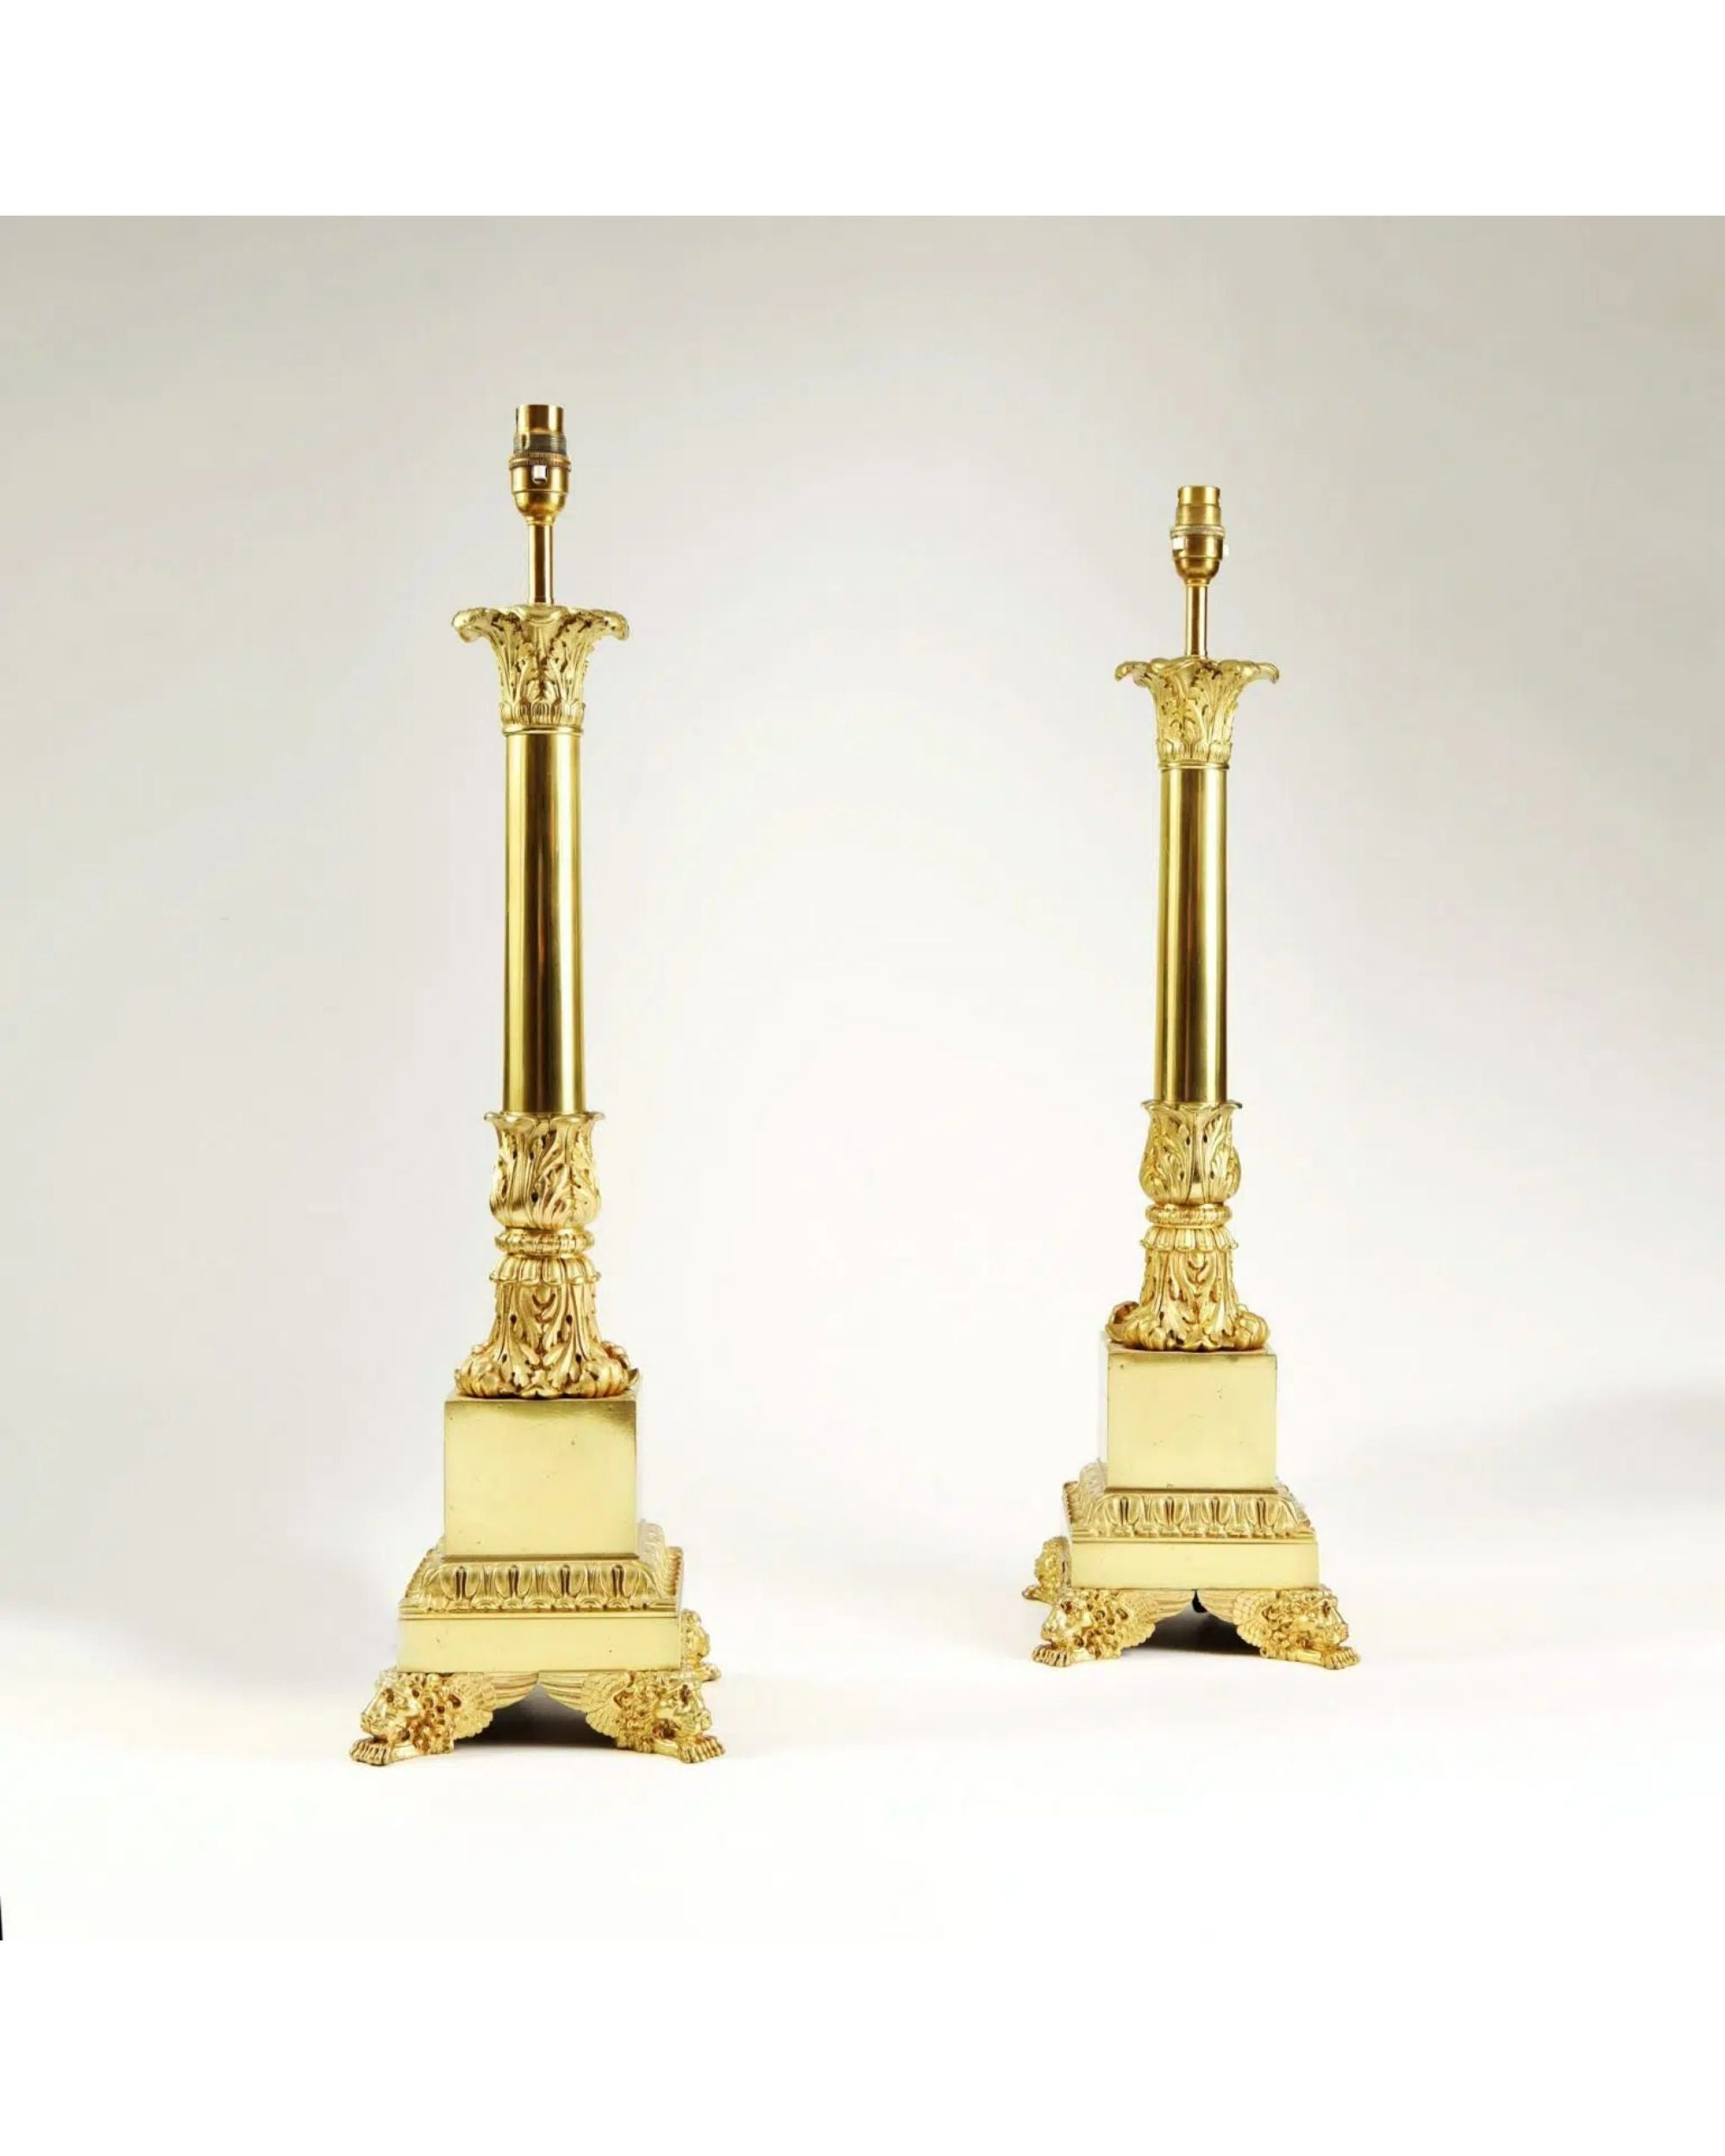 Pair of French Carcel Polished Bronze Table Lamps, 19th Century For Sale